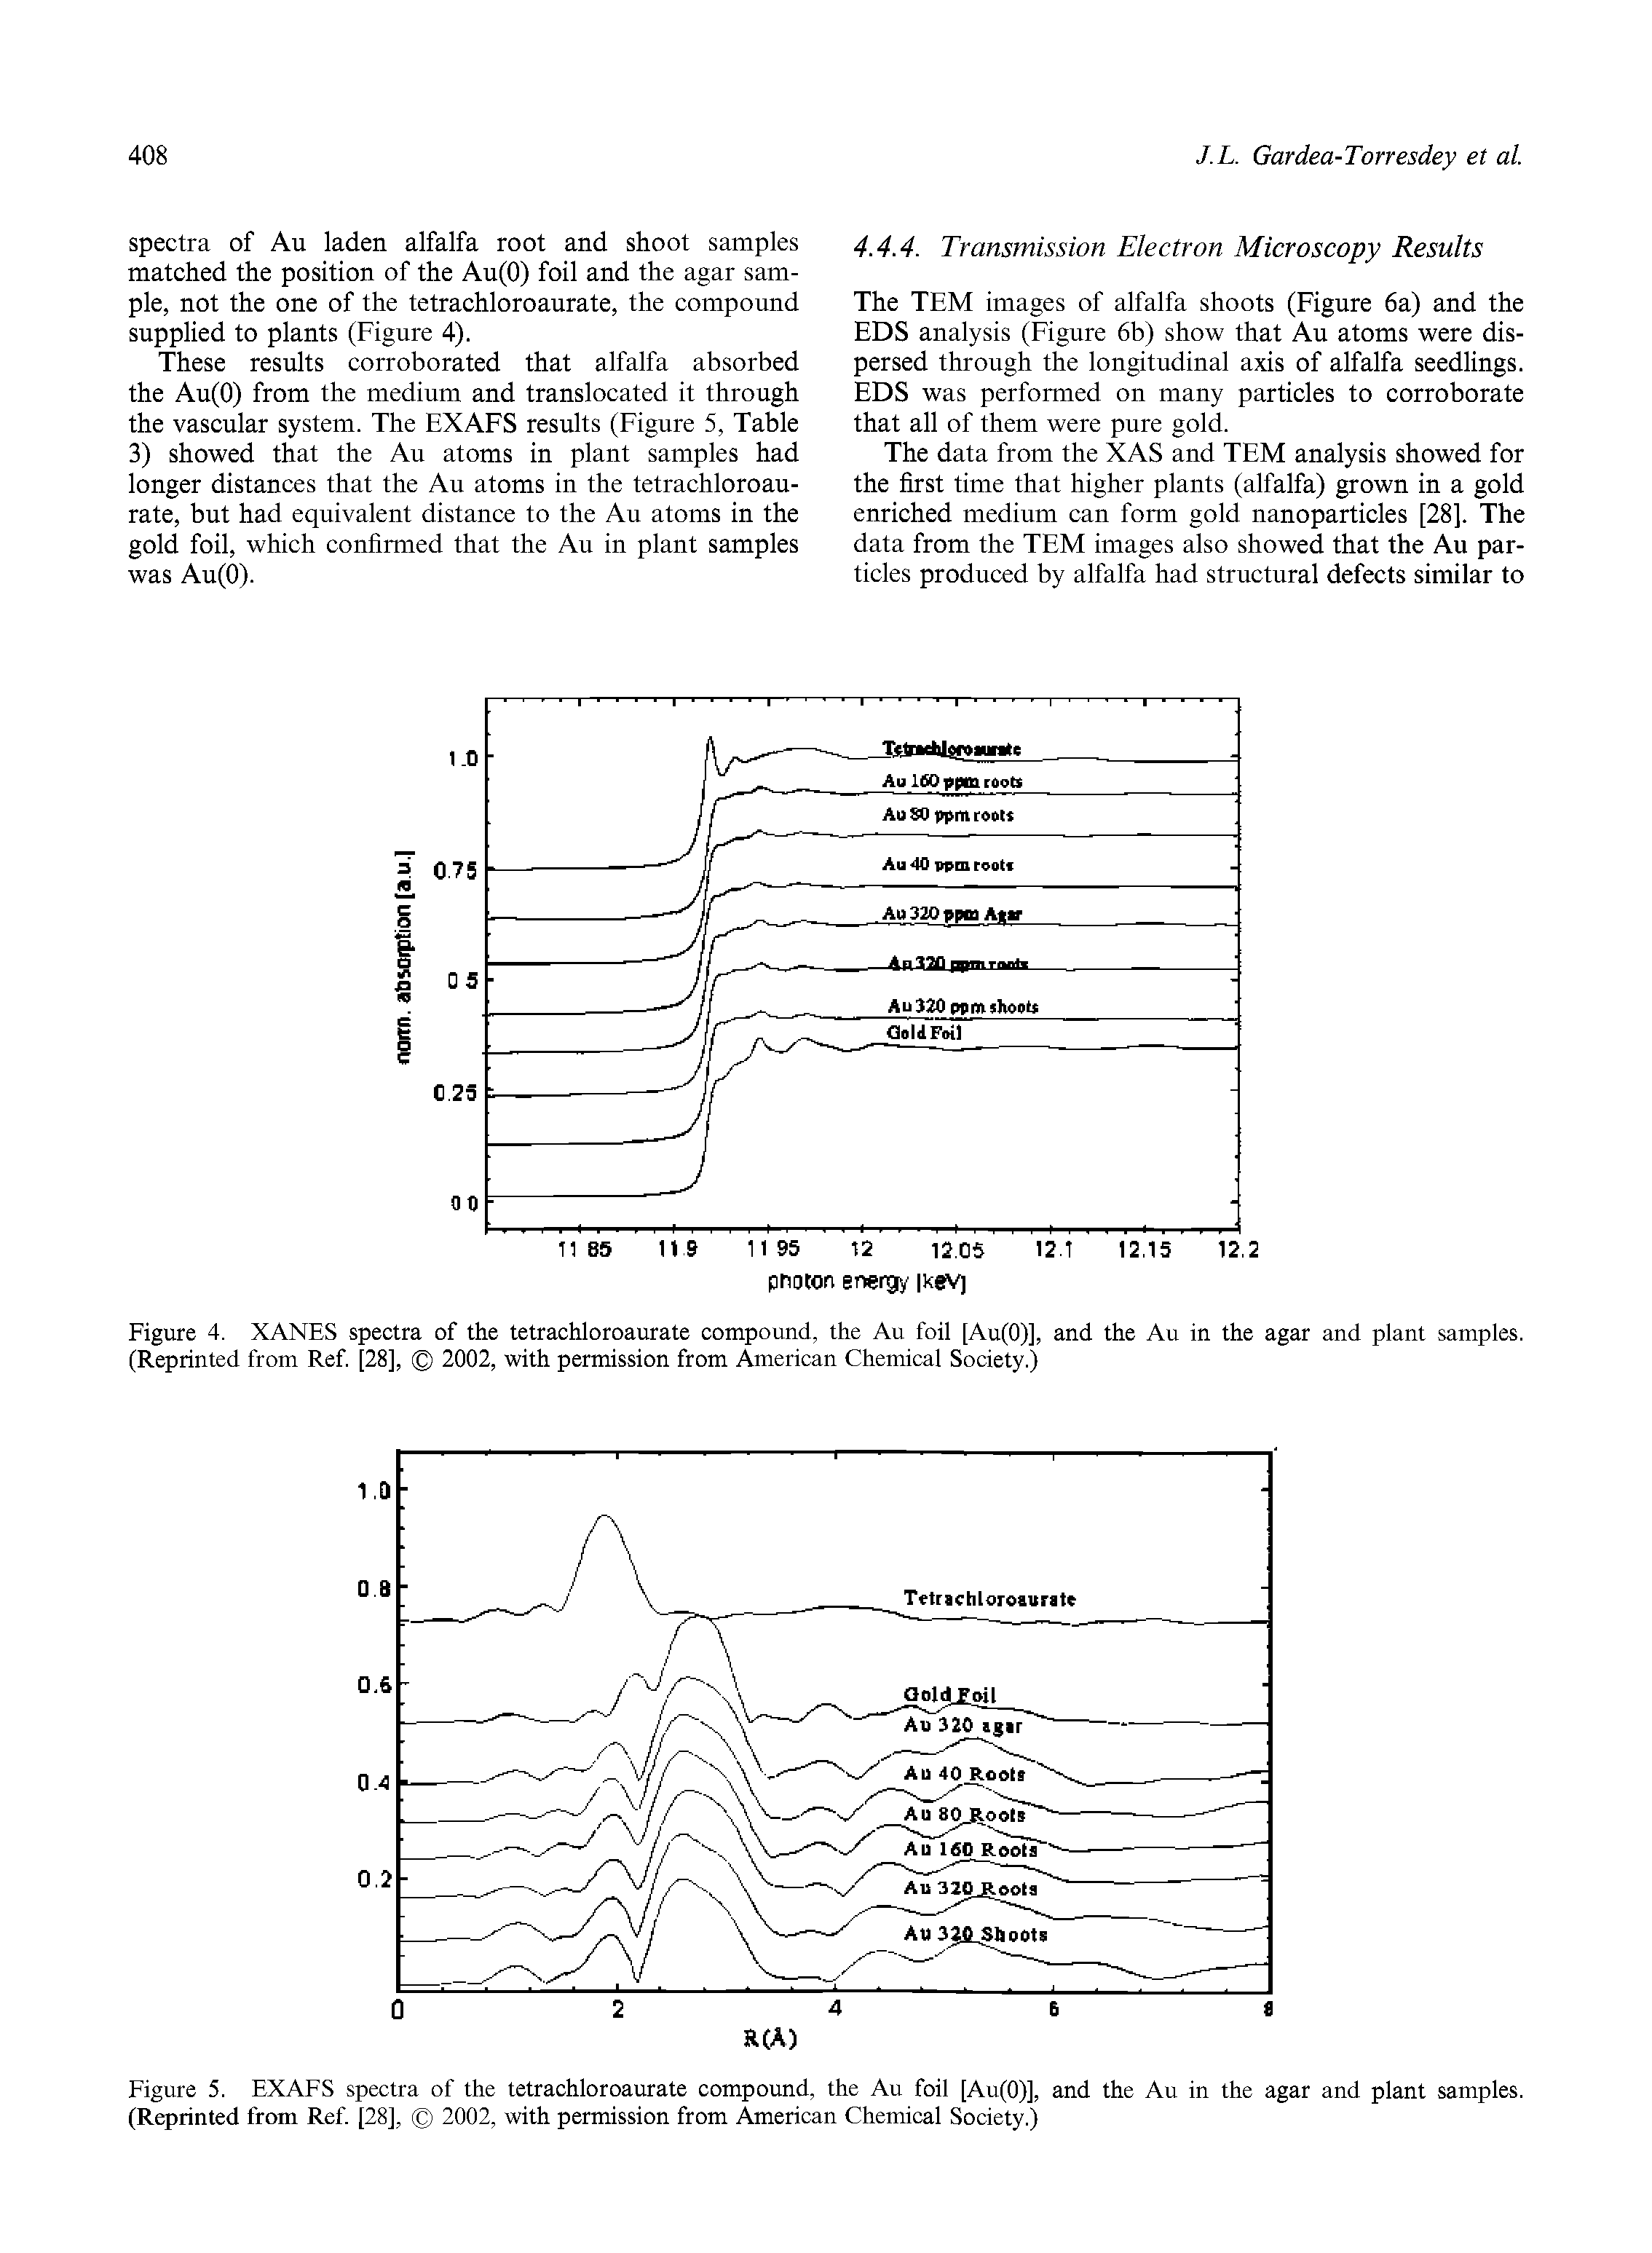 Figure 5. EXAFS spectra of the tetrachloroaurate compound, the Au foil [Au(0)], and the Au in the agar and plant samples. (Reprinted from Ref. [28], 2002, with permission from American Chemical Society.)...